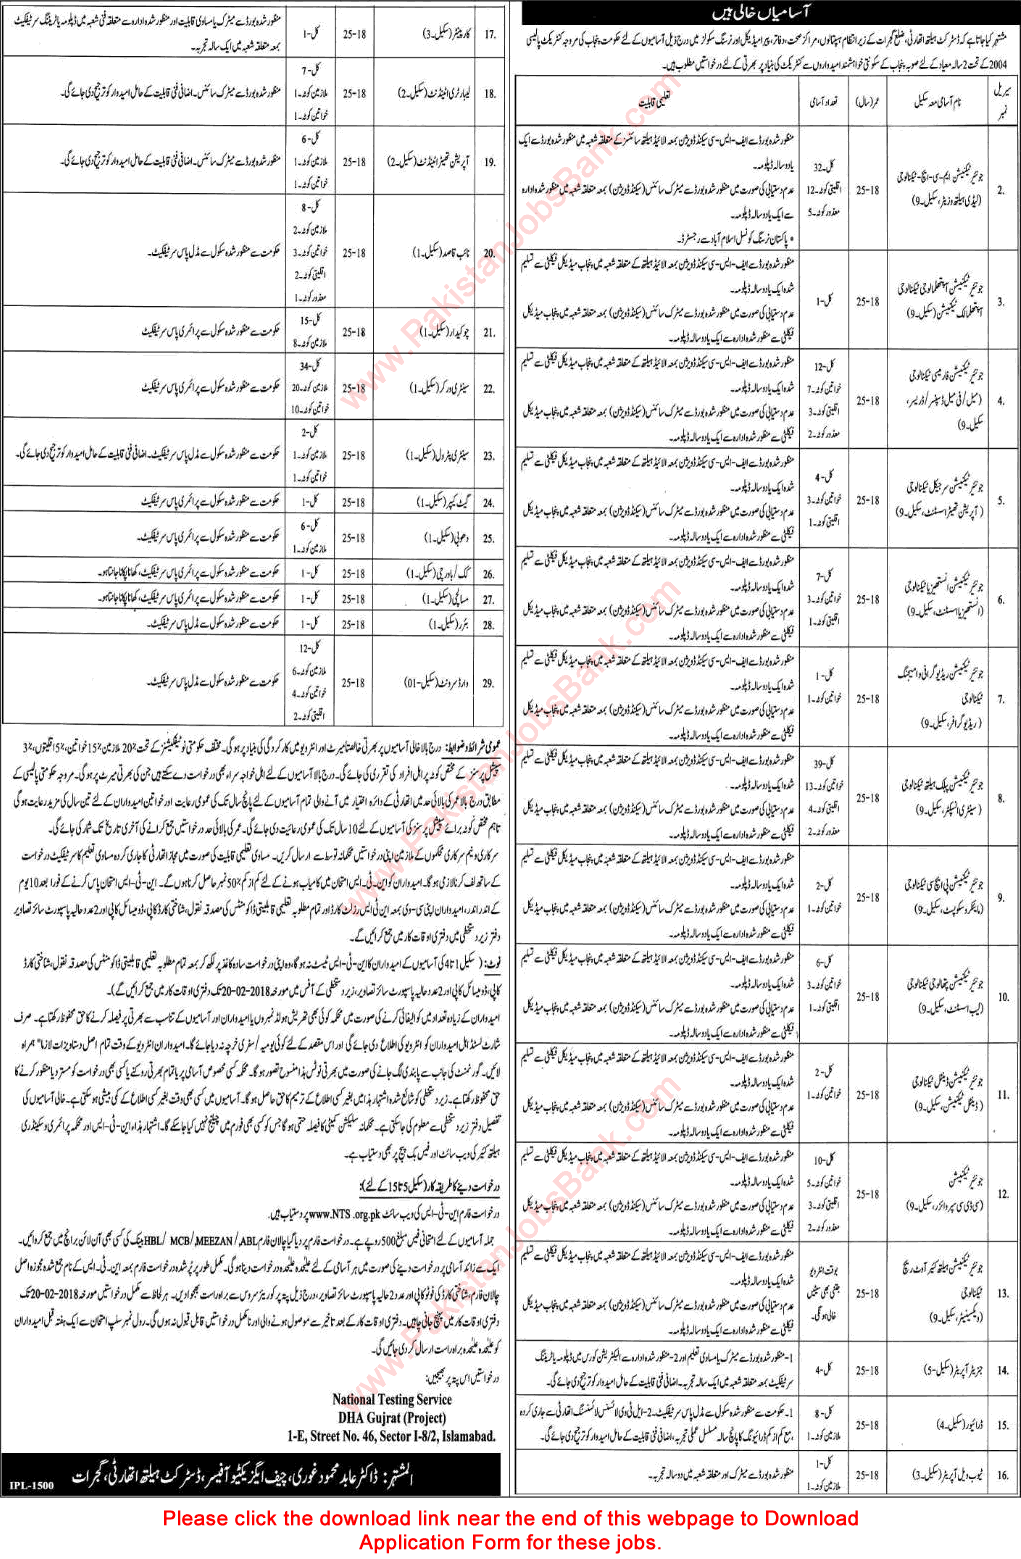 Health Department Gujrat Jobs 2018 February NTS Application Form Sanitary Inspectors, LHV & Others Latest